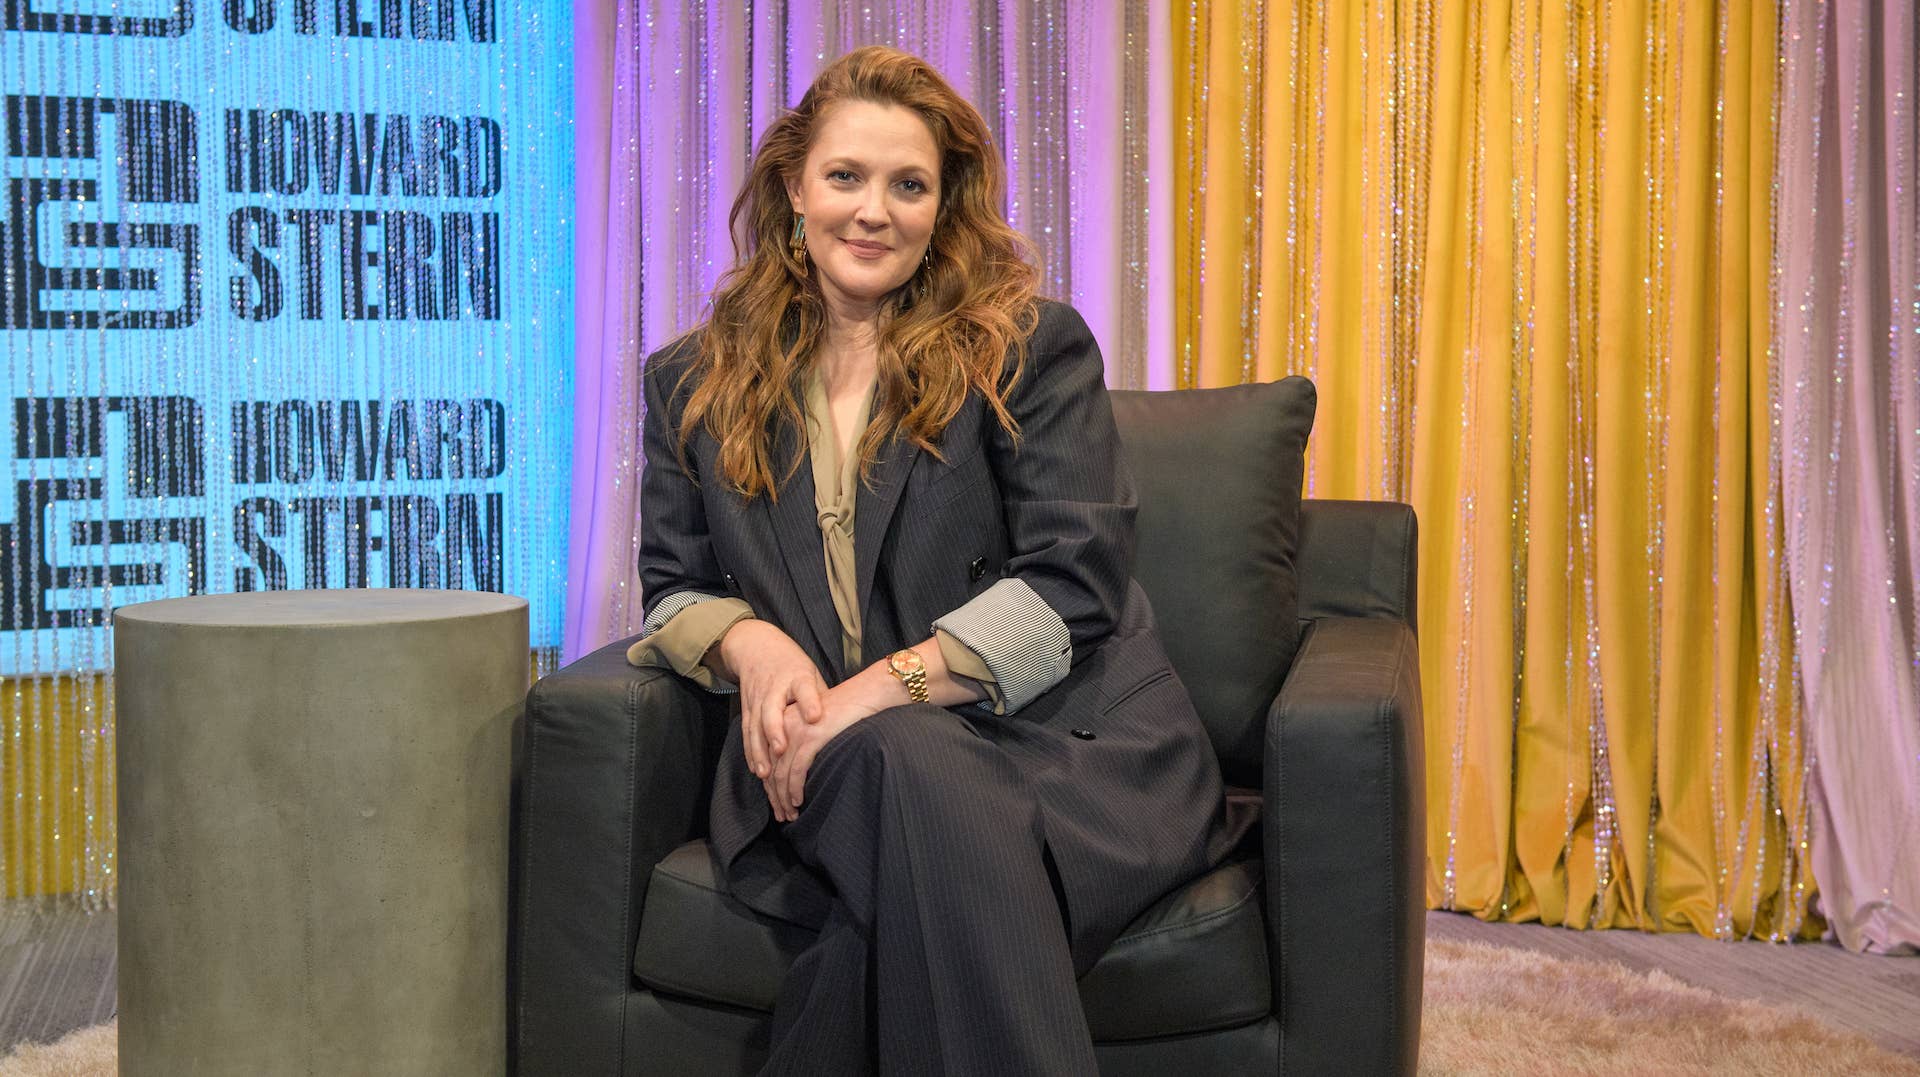 Drew Barrymore attends the Howard Stern Show